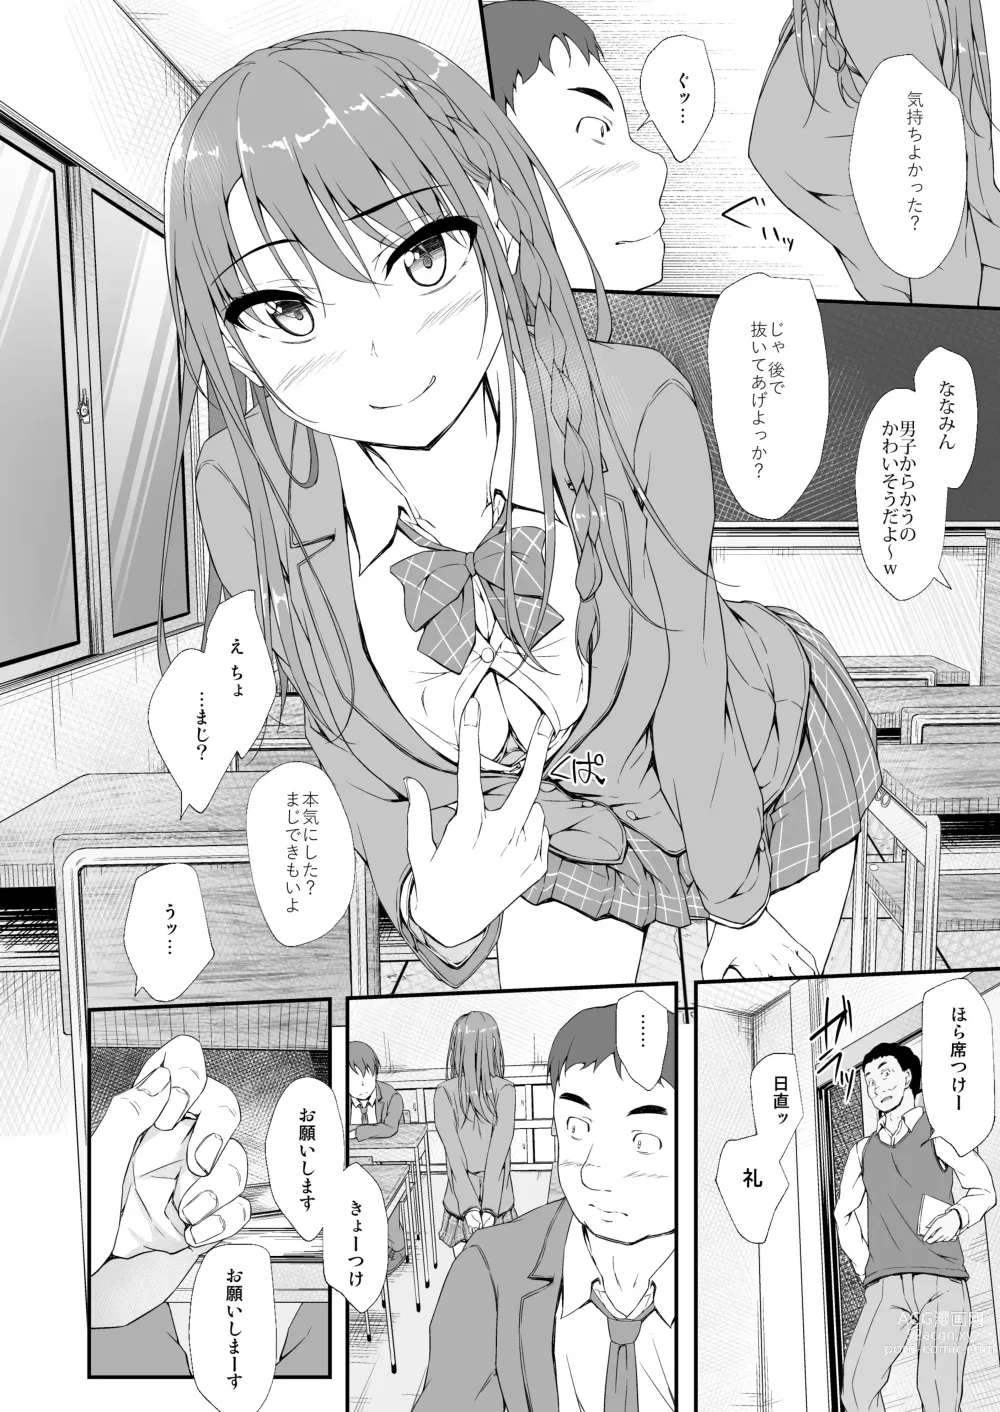 Page 51 of doujinshi Re:Temptation 6